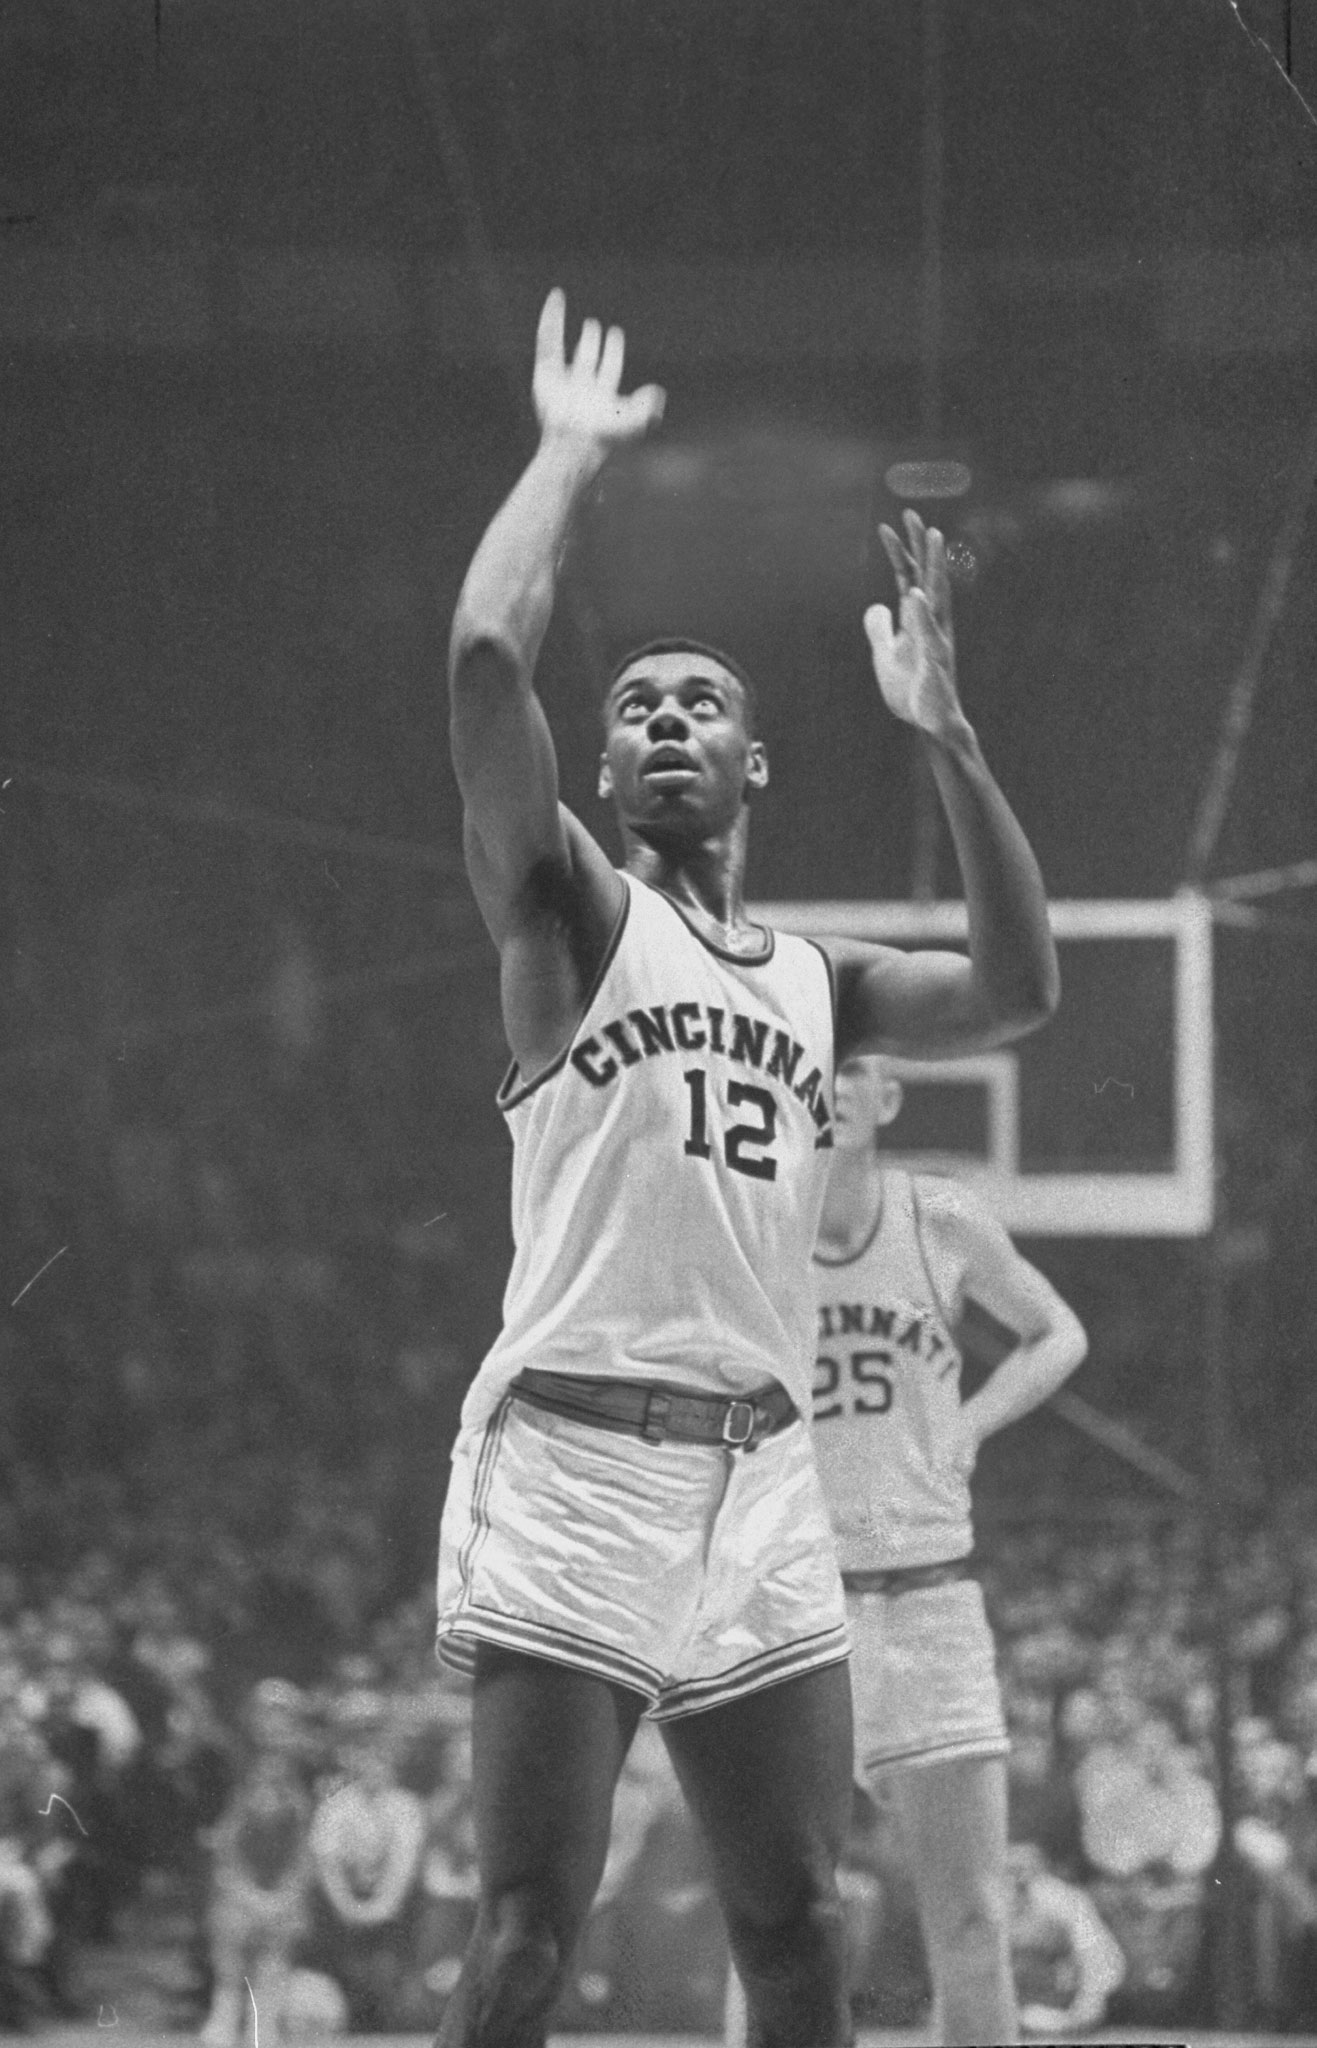 One of the first big guards in basketball, 6' 5", 220-pound Oscar Robertson (above, in 1959) led the nation in scoring in each of his three seasons at Cincinnati and left school as the top scorer in college history. His 33.8-point career average is still the third-highest in NCAA history. The Big O was inducted into the NBA Hall of Fame in 1980 and in 1996 was voted one of The 50 Greatest Players in NBA History.